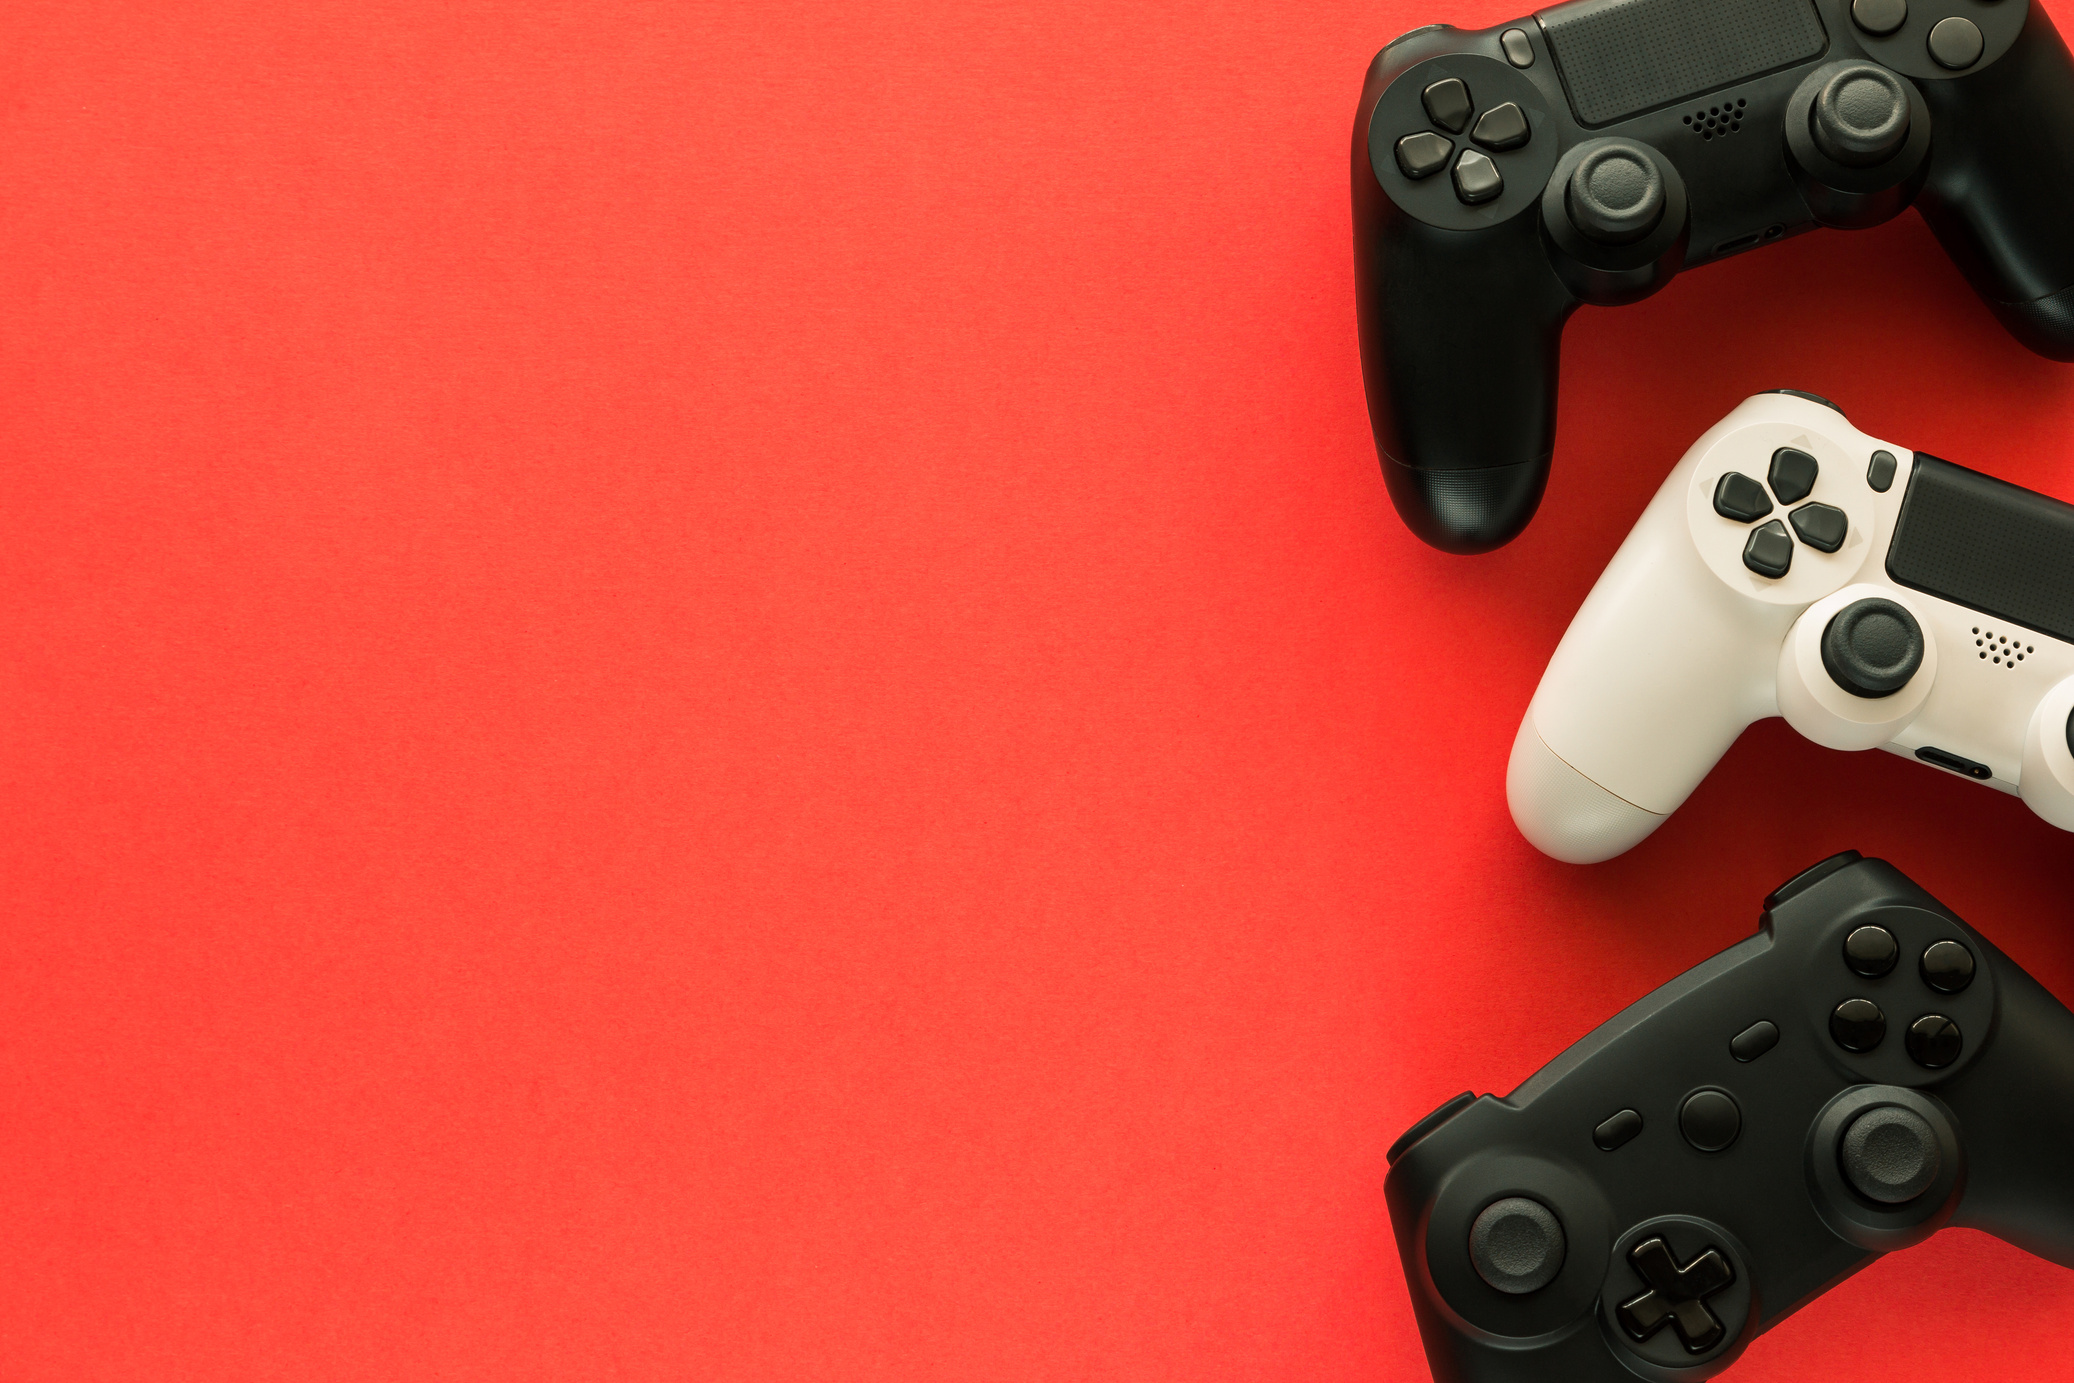 Stock Photo of Three Gamepads on a Red Background 